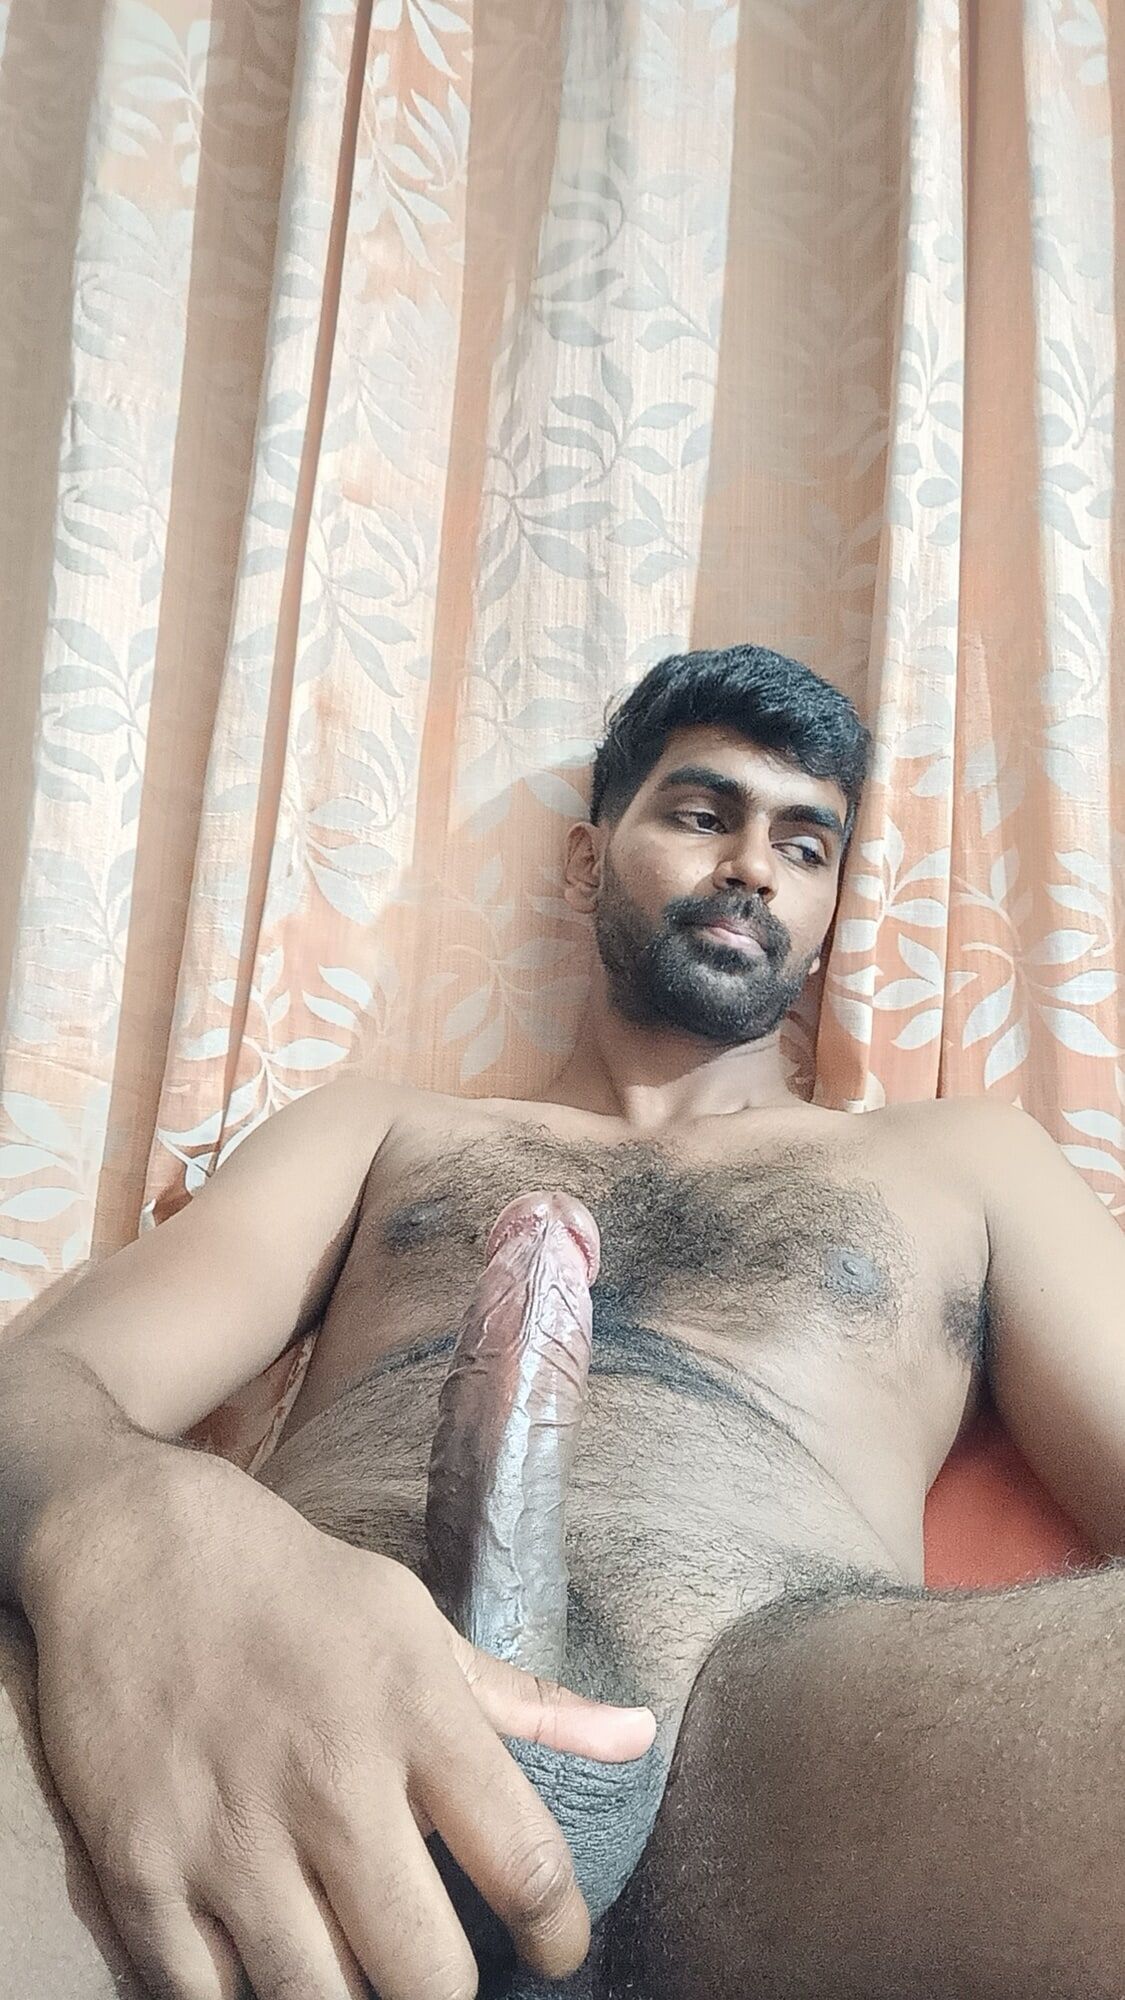 Horny and naked erected cock 